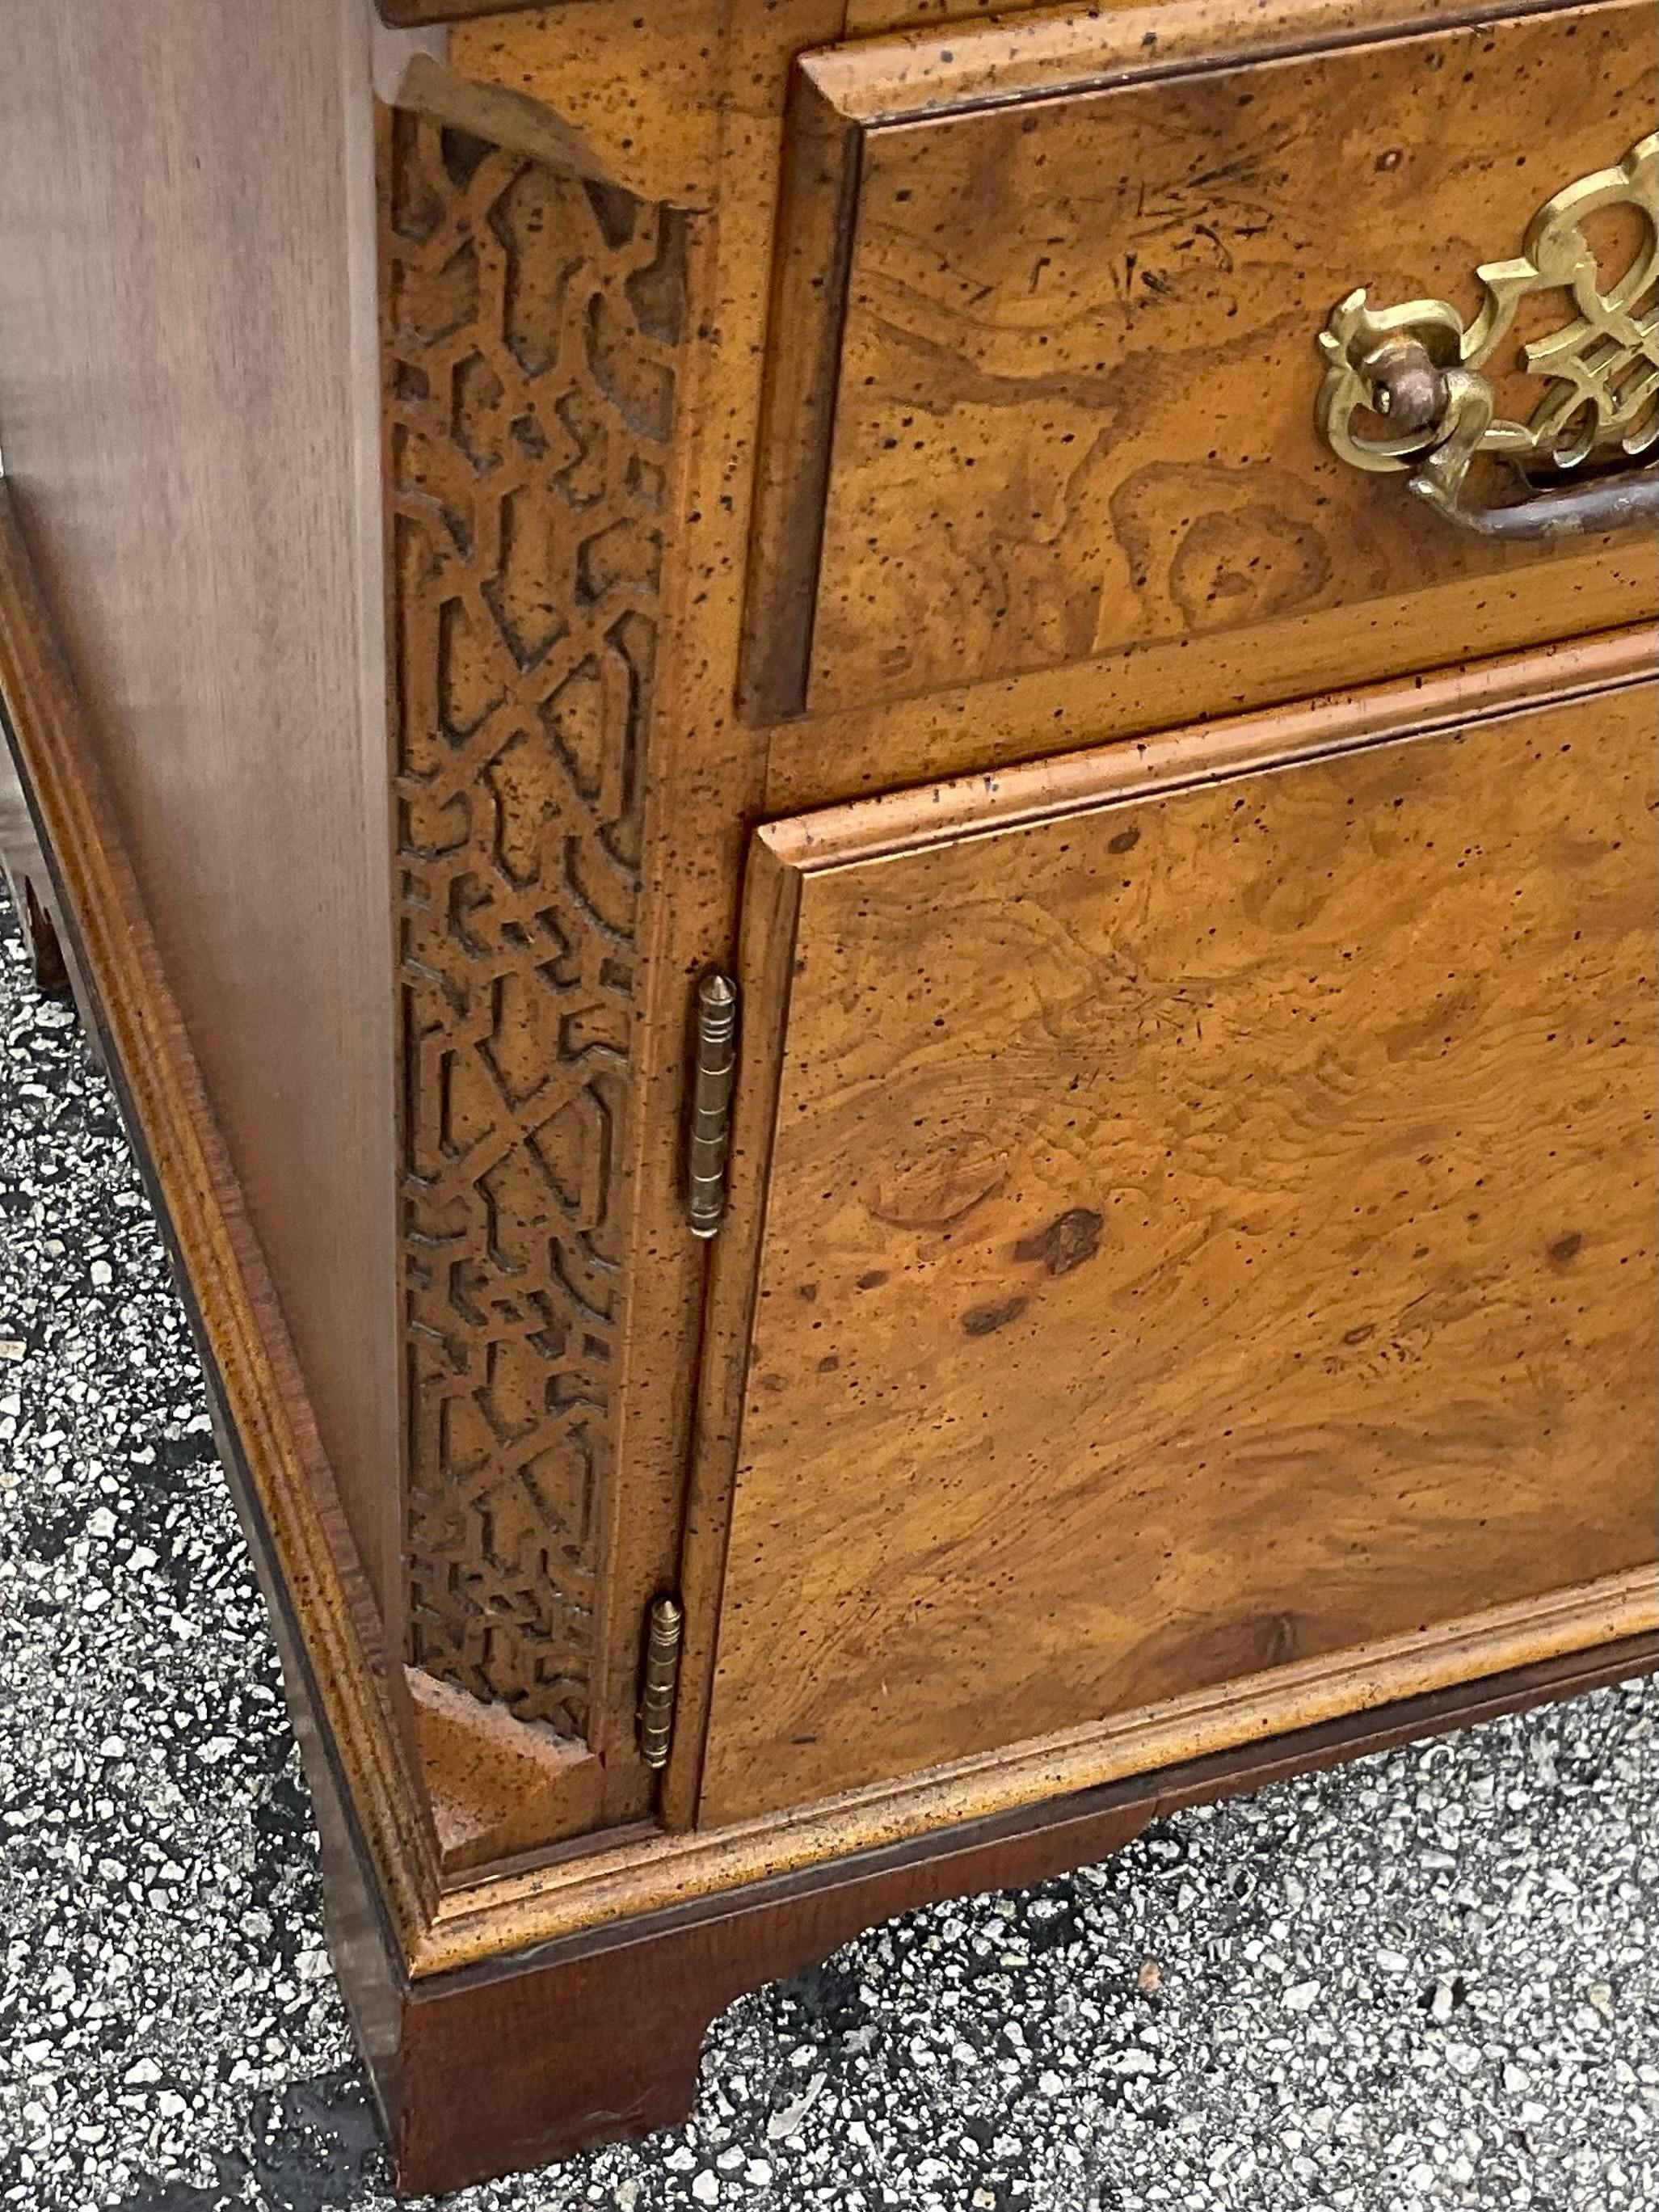 Vintage Regency tall chest of drawers. Made by the iconic Baker group and tagged inside the drawer. A chic tall shape in Burl wood with fretwork trim. Coordinating pieces also available on my page. Acquired from a Palm Beach estate.